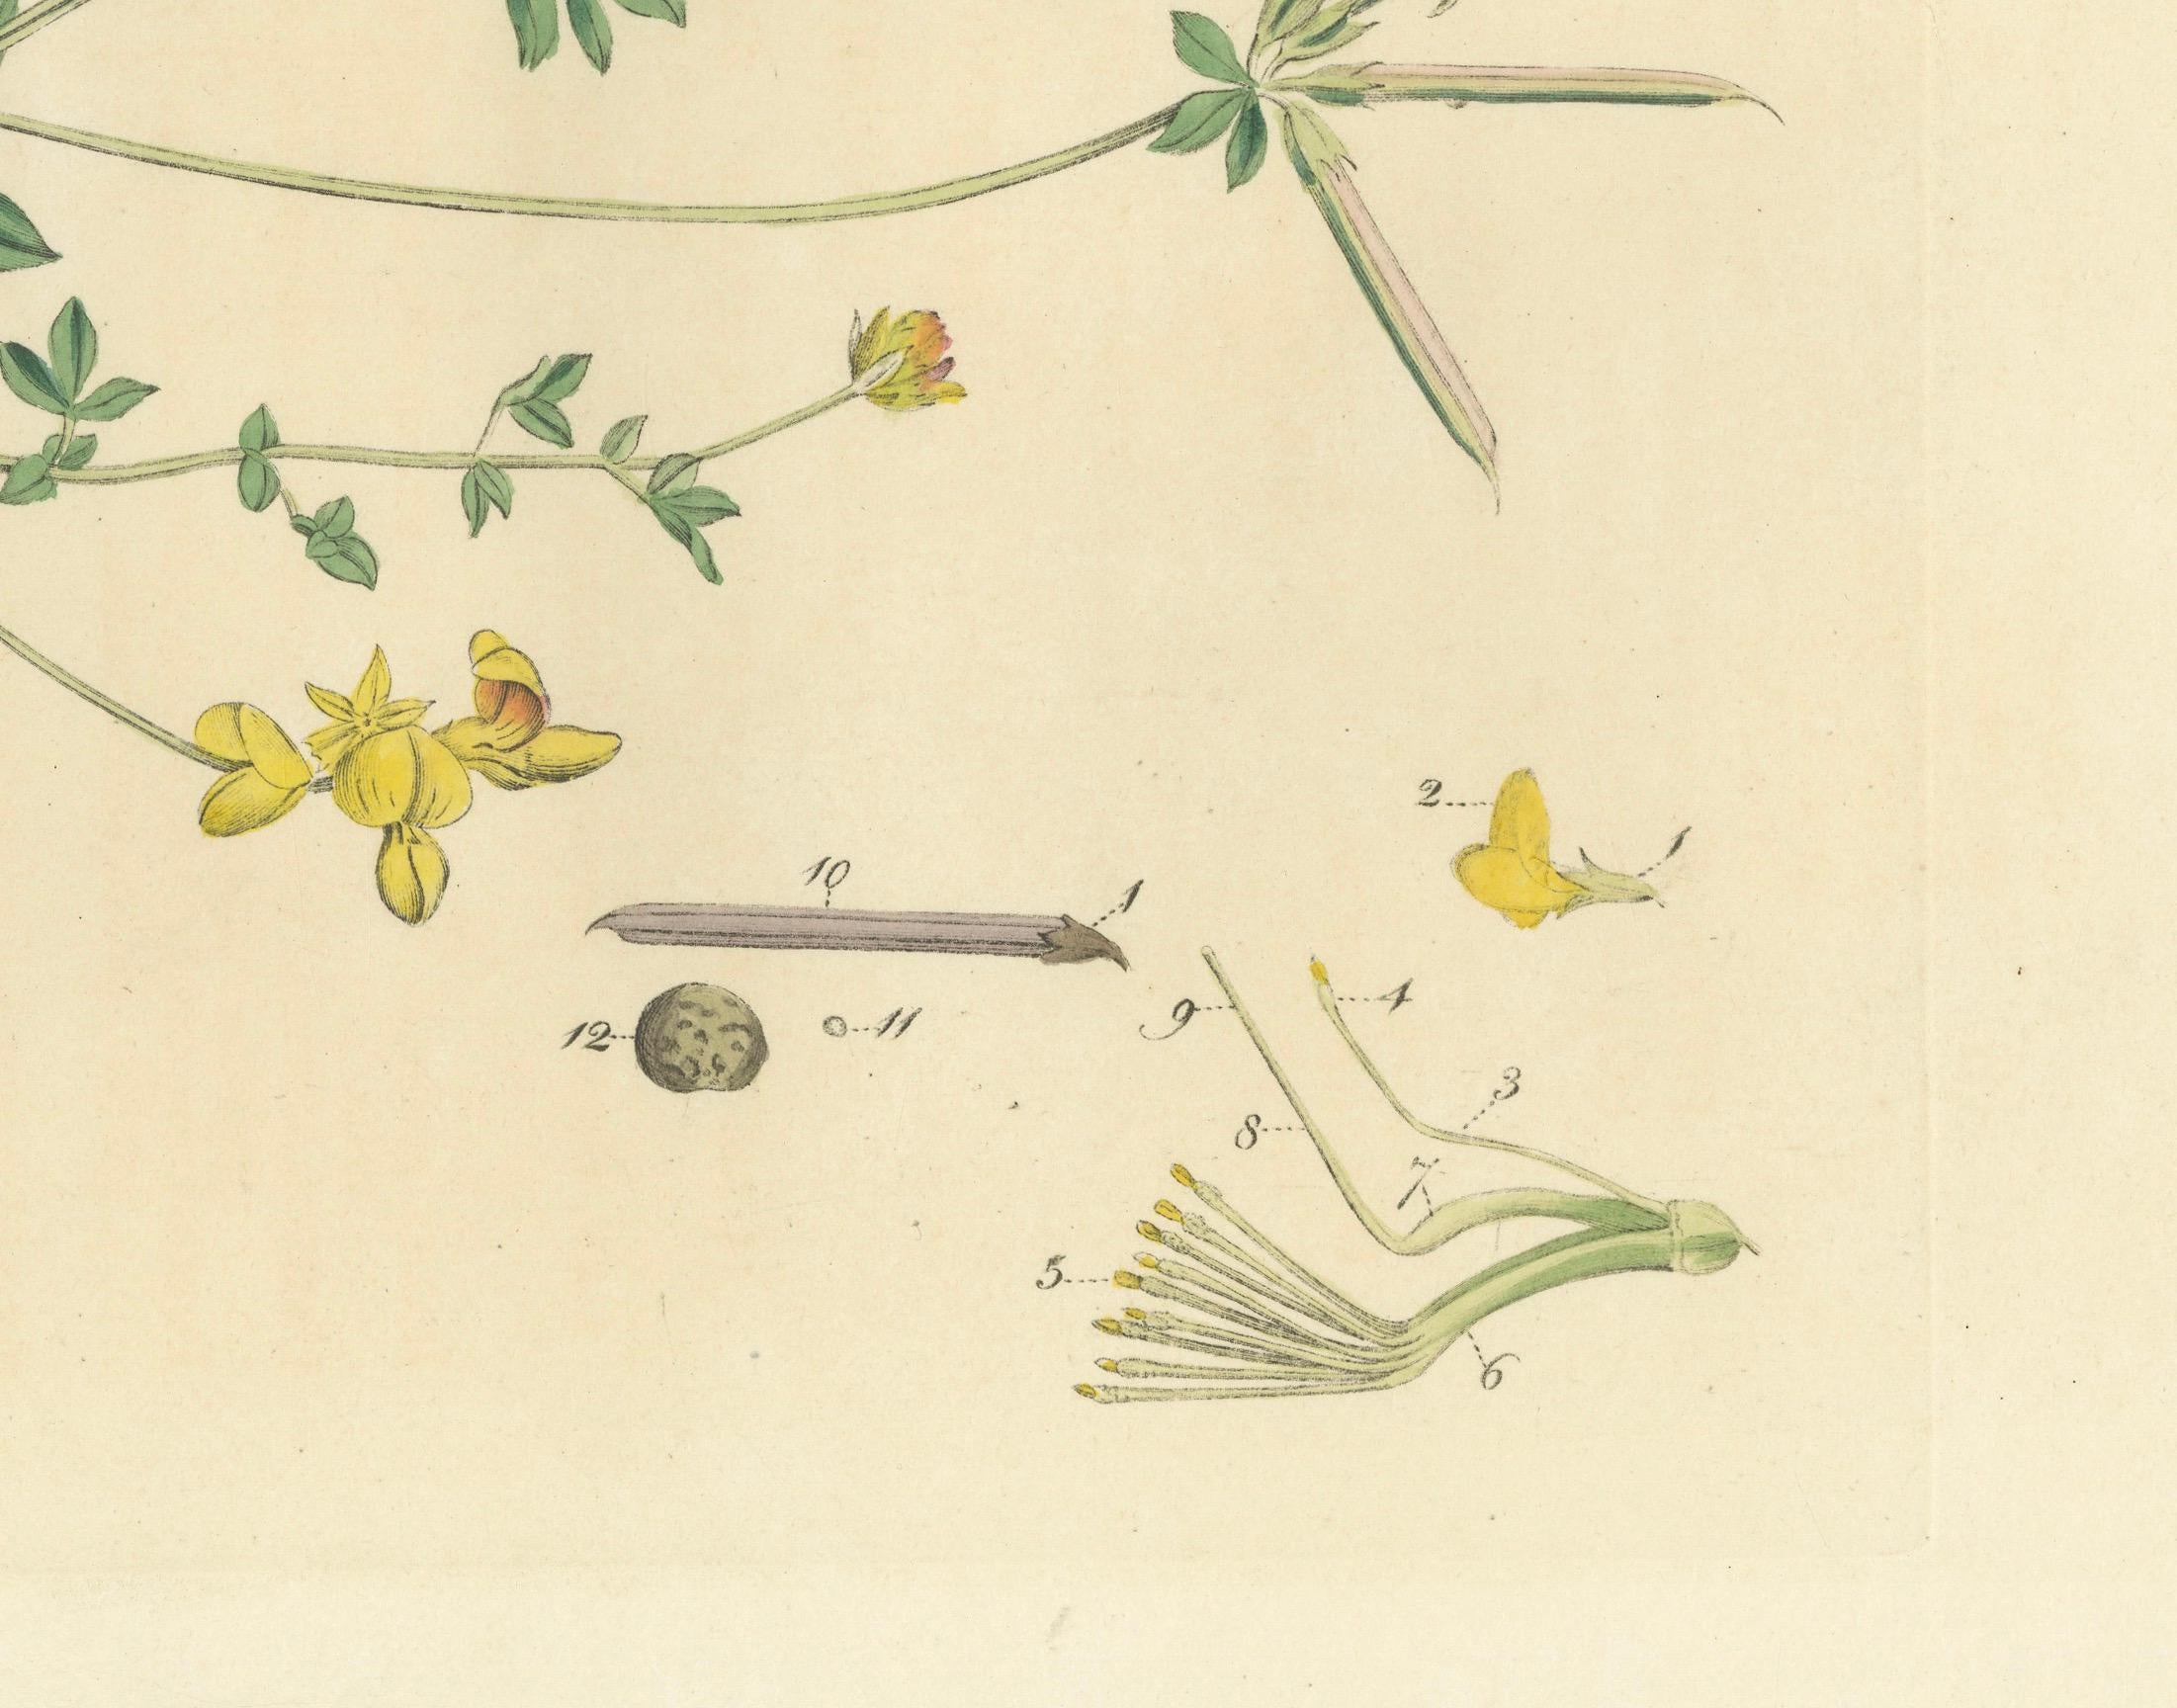 The image is of Lotus corniculatus, commonly known as Birds-foot Trefoil. 

This illustration is from 